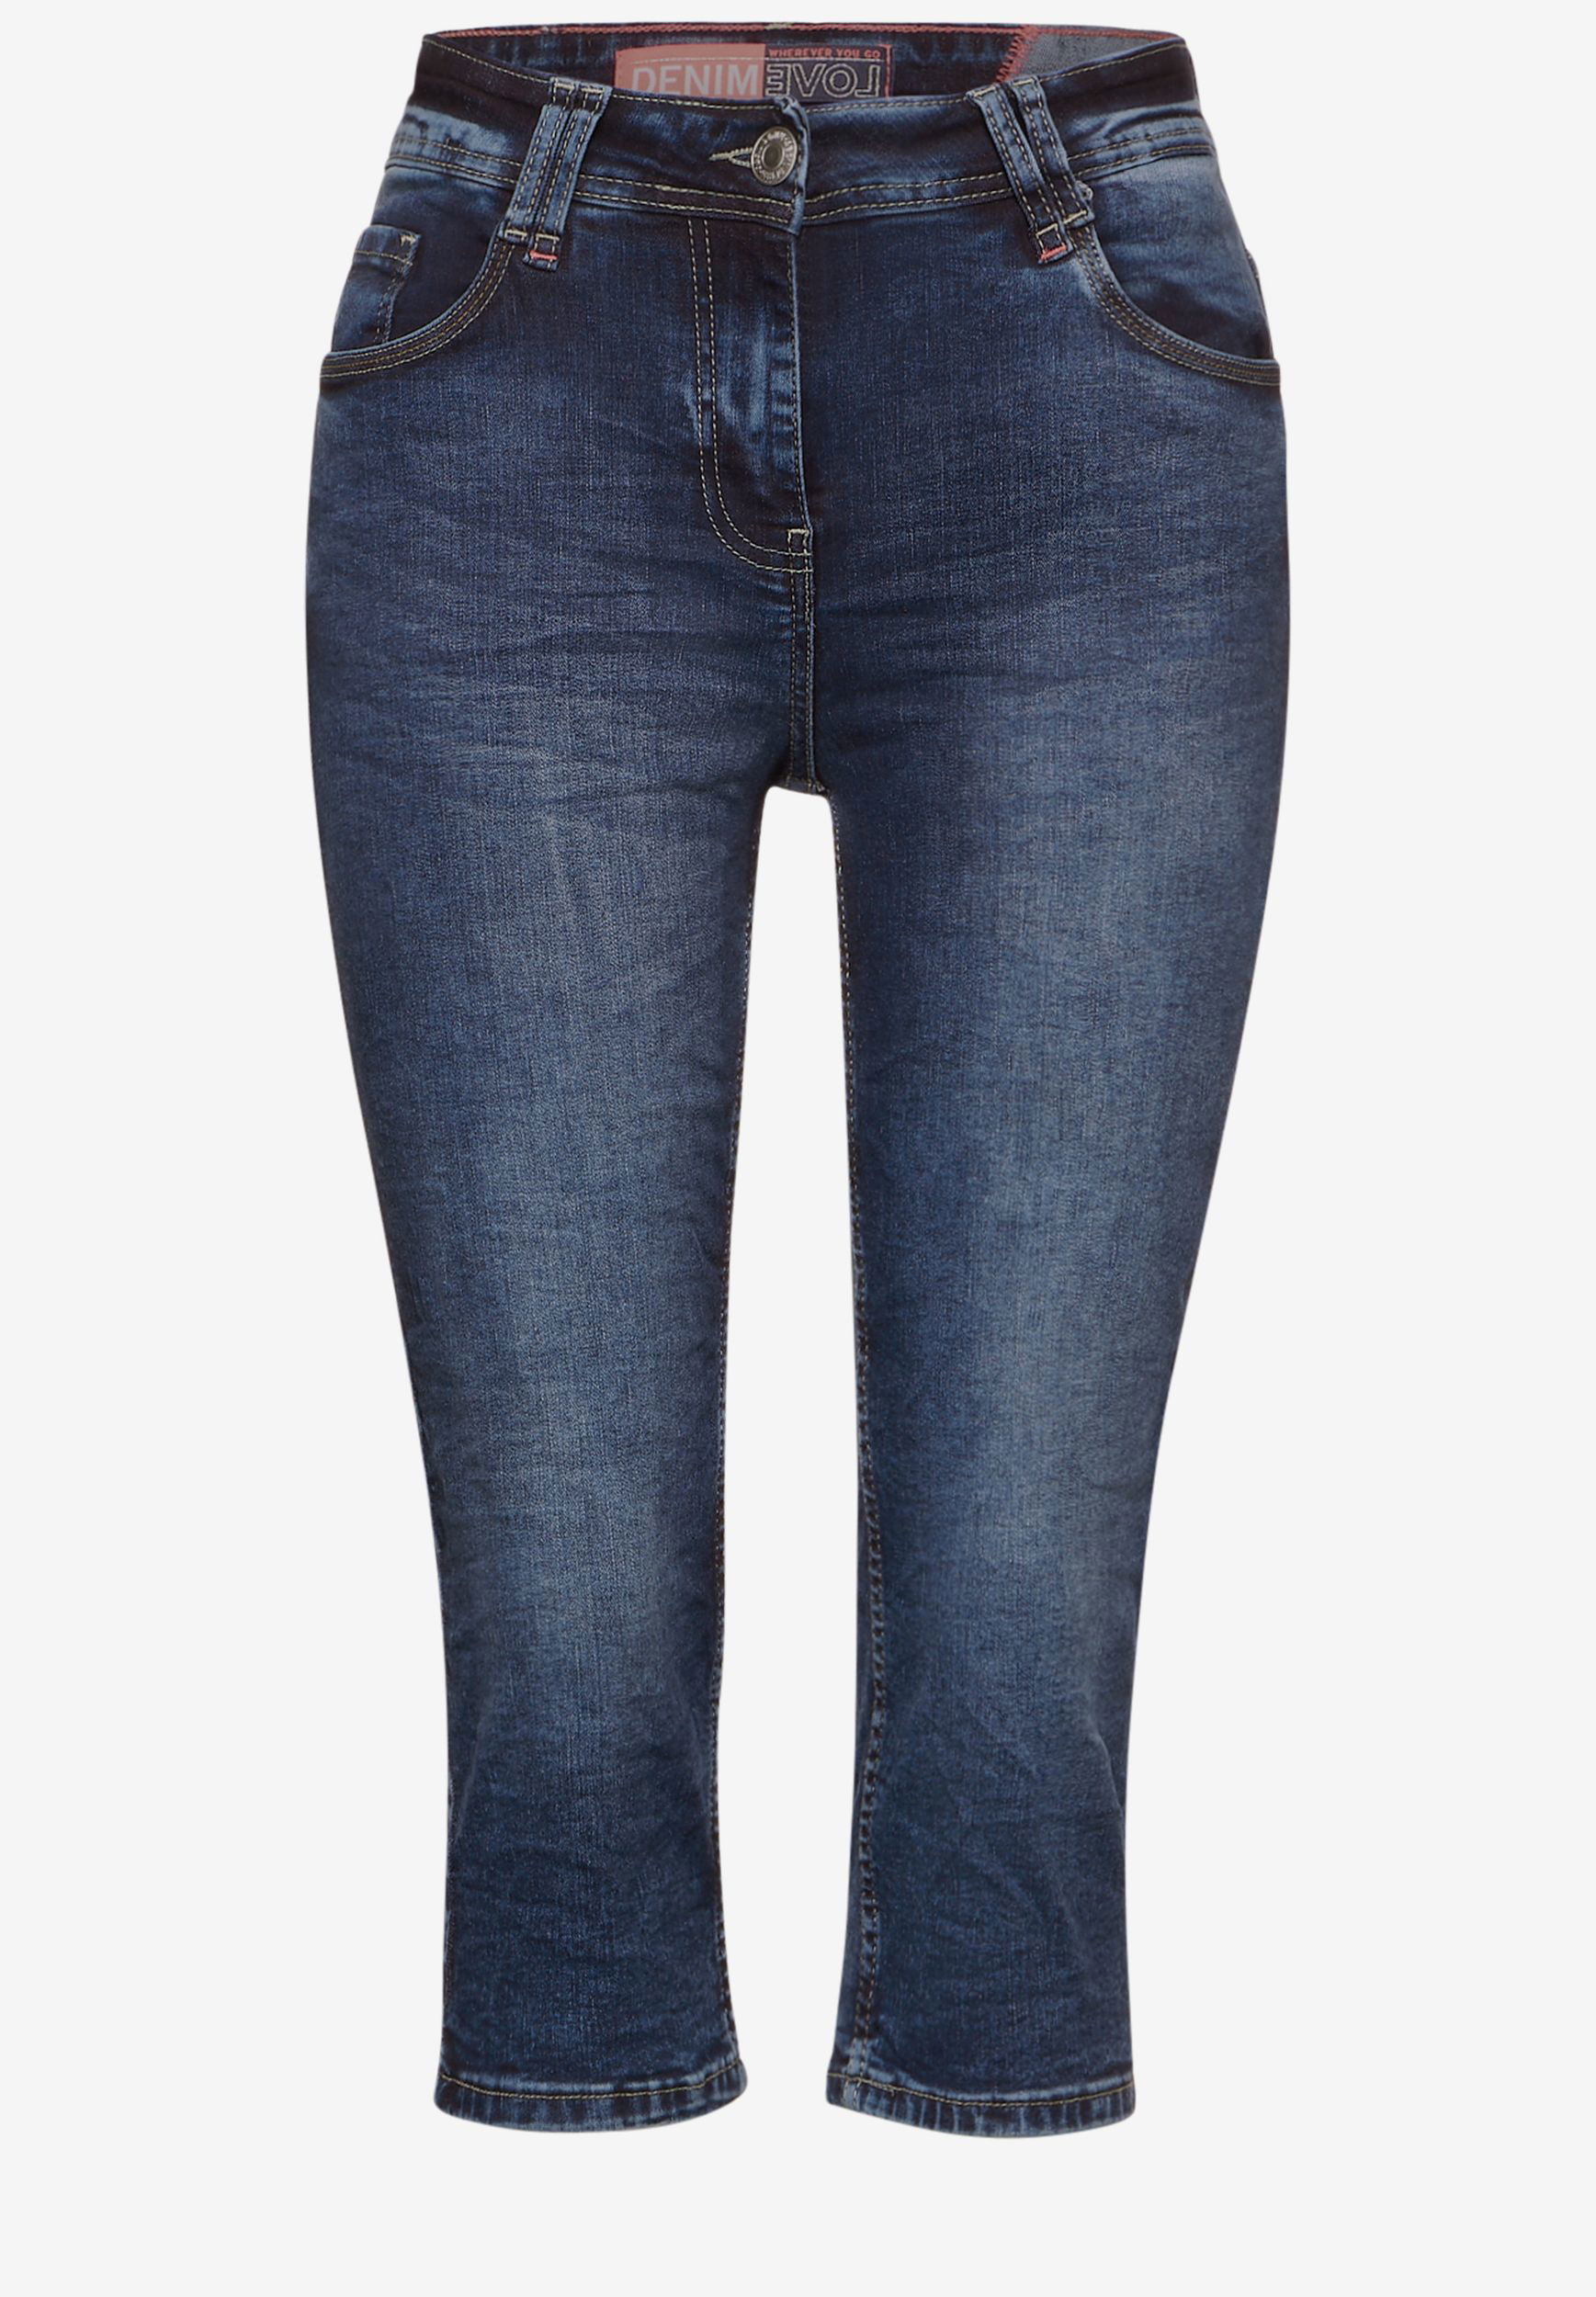 CECIL |  CECIL 7/8-Jeans  | mid blue used wash